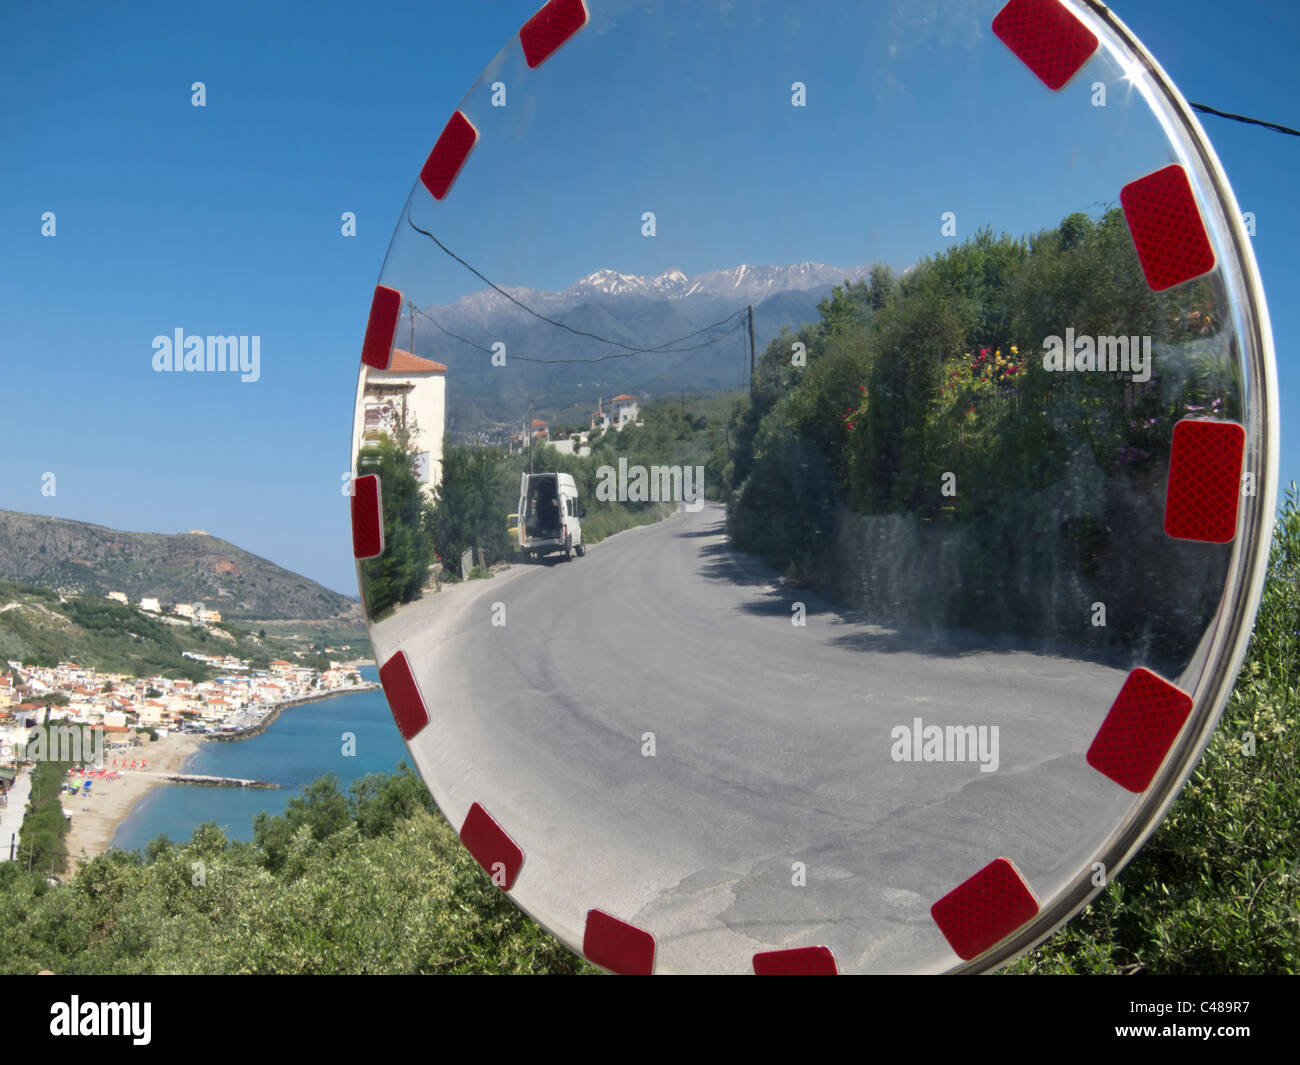 View in a road traffic safety mirror on Almirida, a small Village on Crete, Greece. Stock Photo